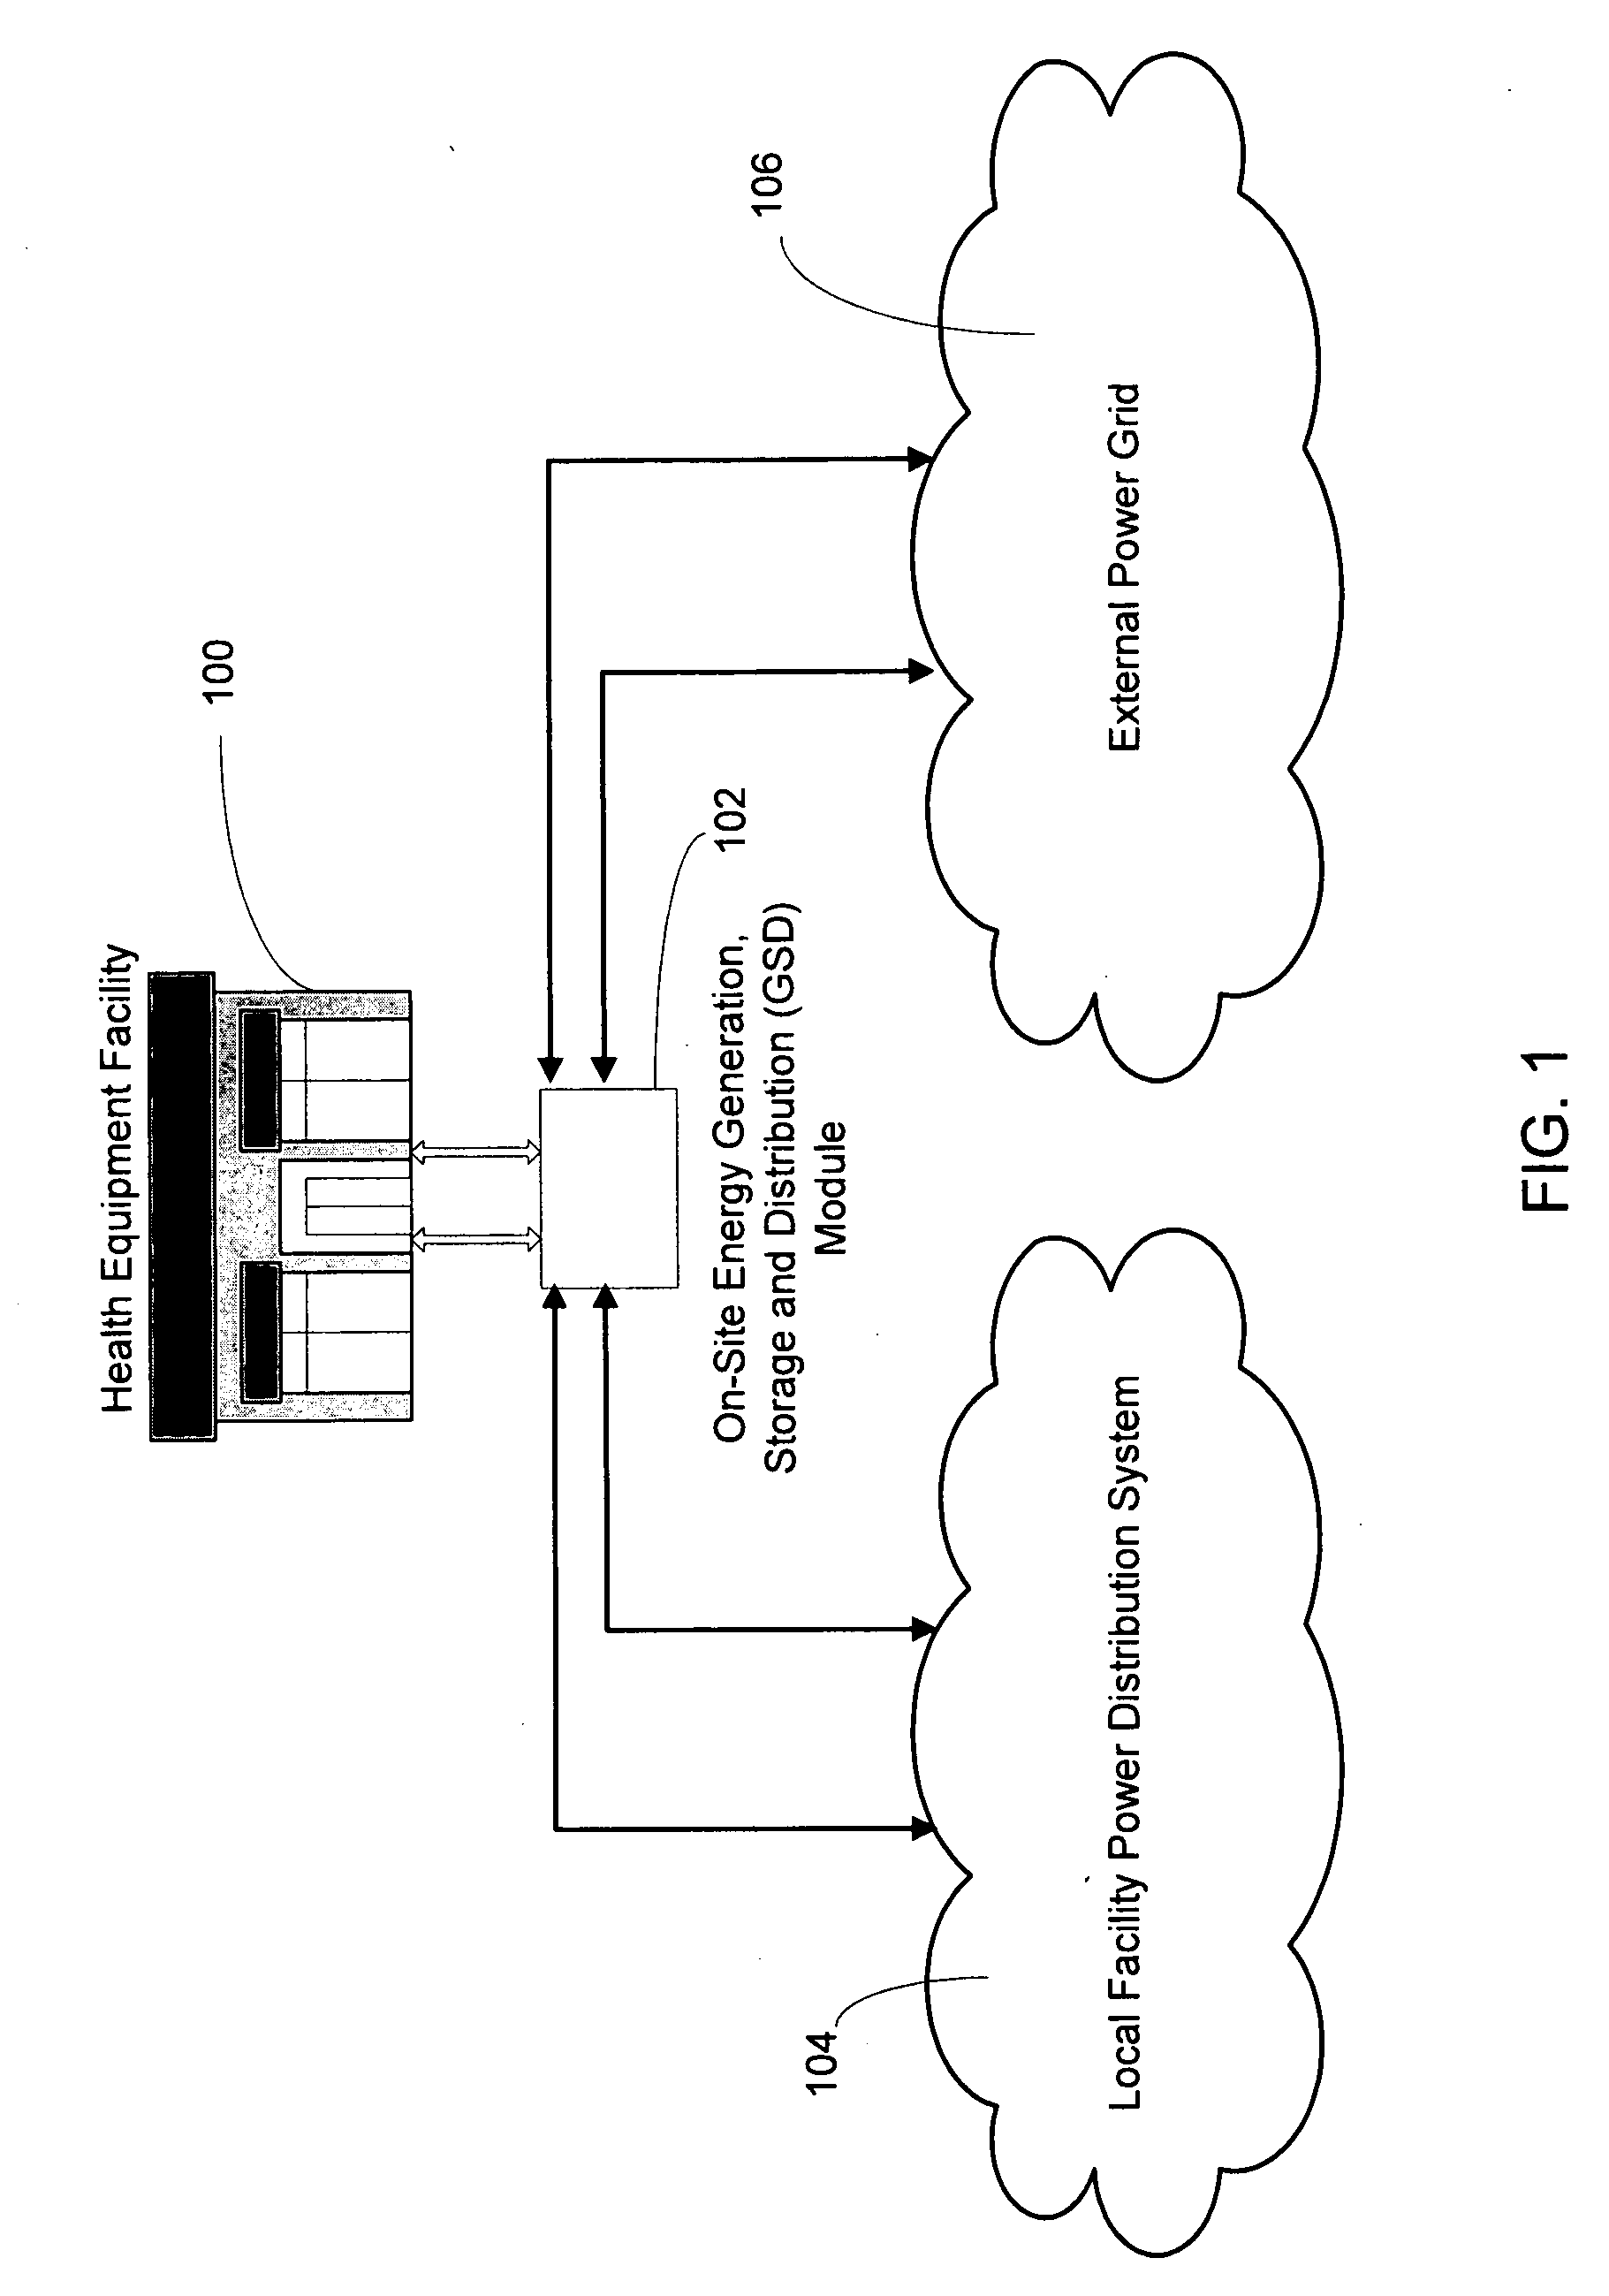 System and Method for Harnessing and Distributing Normally Wasted Human Energy